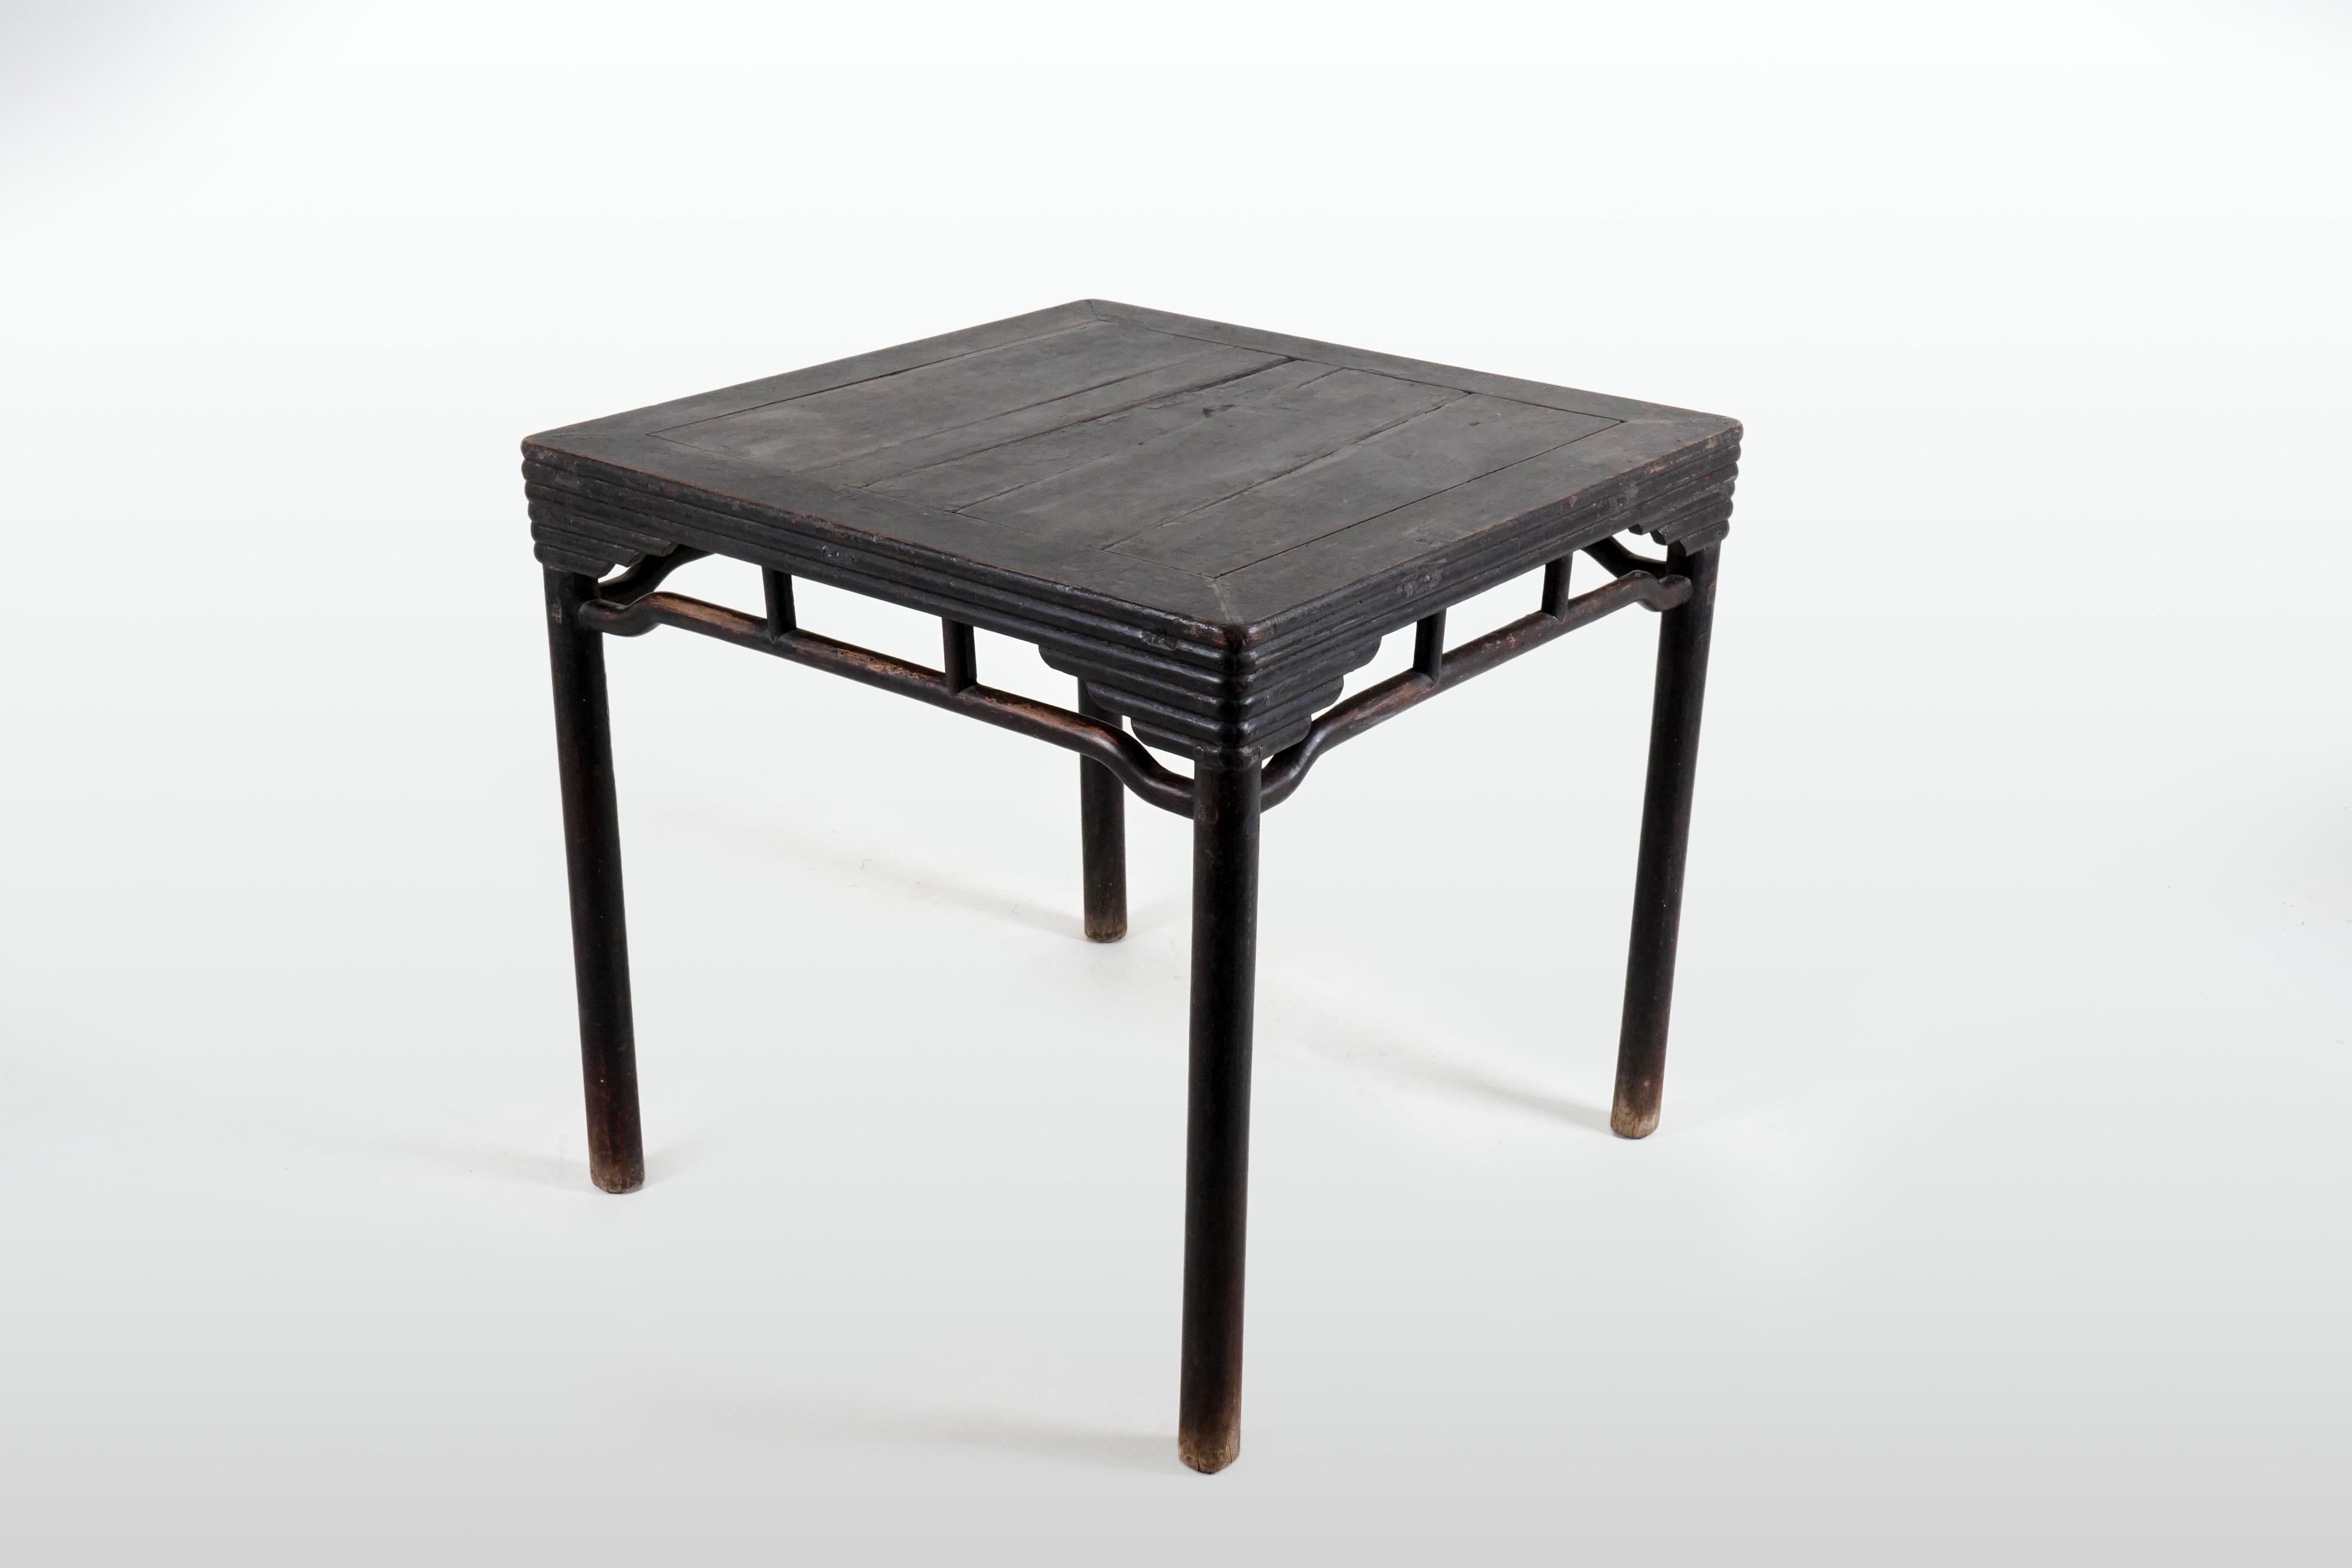 A game table from the 19th century with humpback stretchers, pillar legs and bamboo motif bundled crossmembers. Created in China during the Qing Dynasty in the 19th century, this sturdy table features a square planked top sitting above an openwork